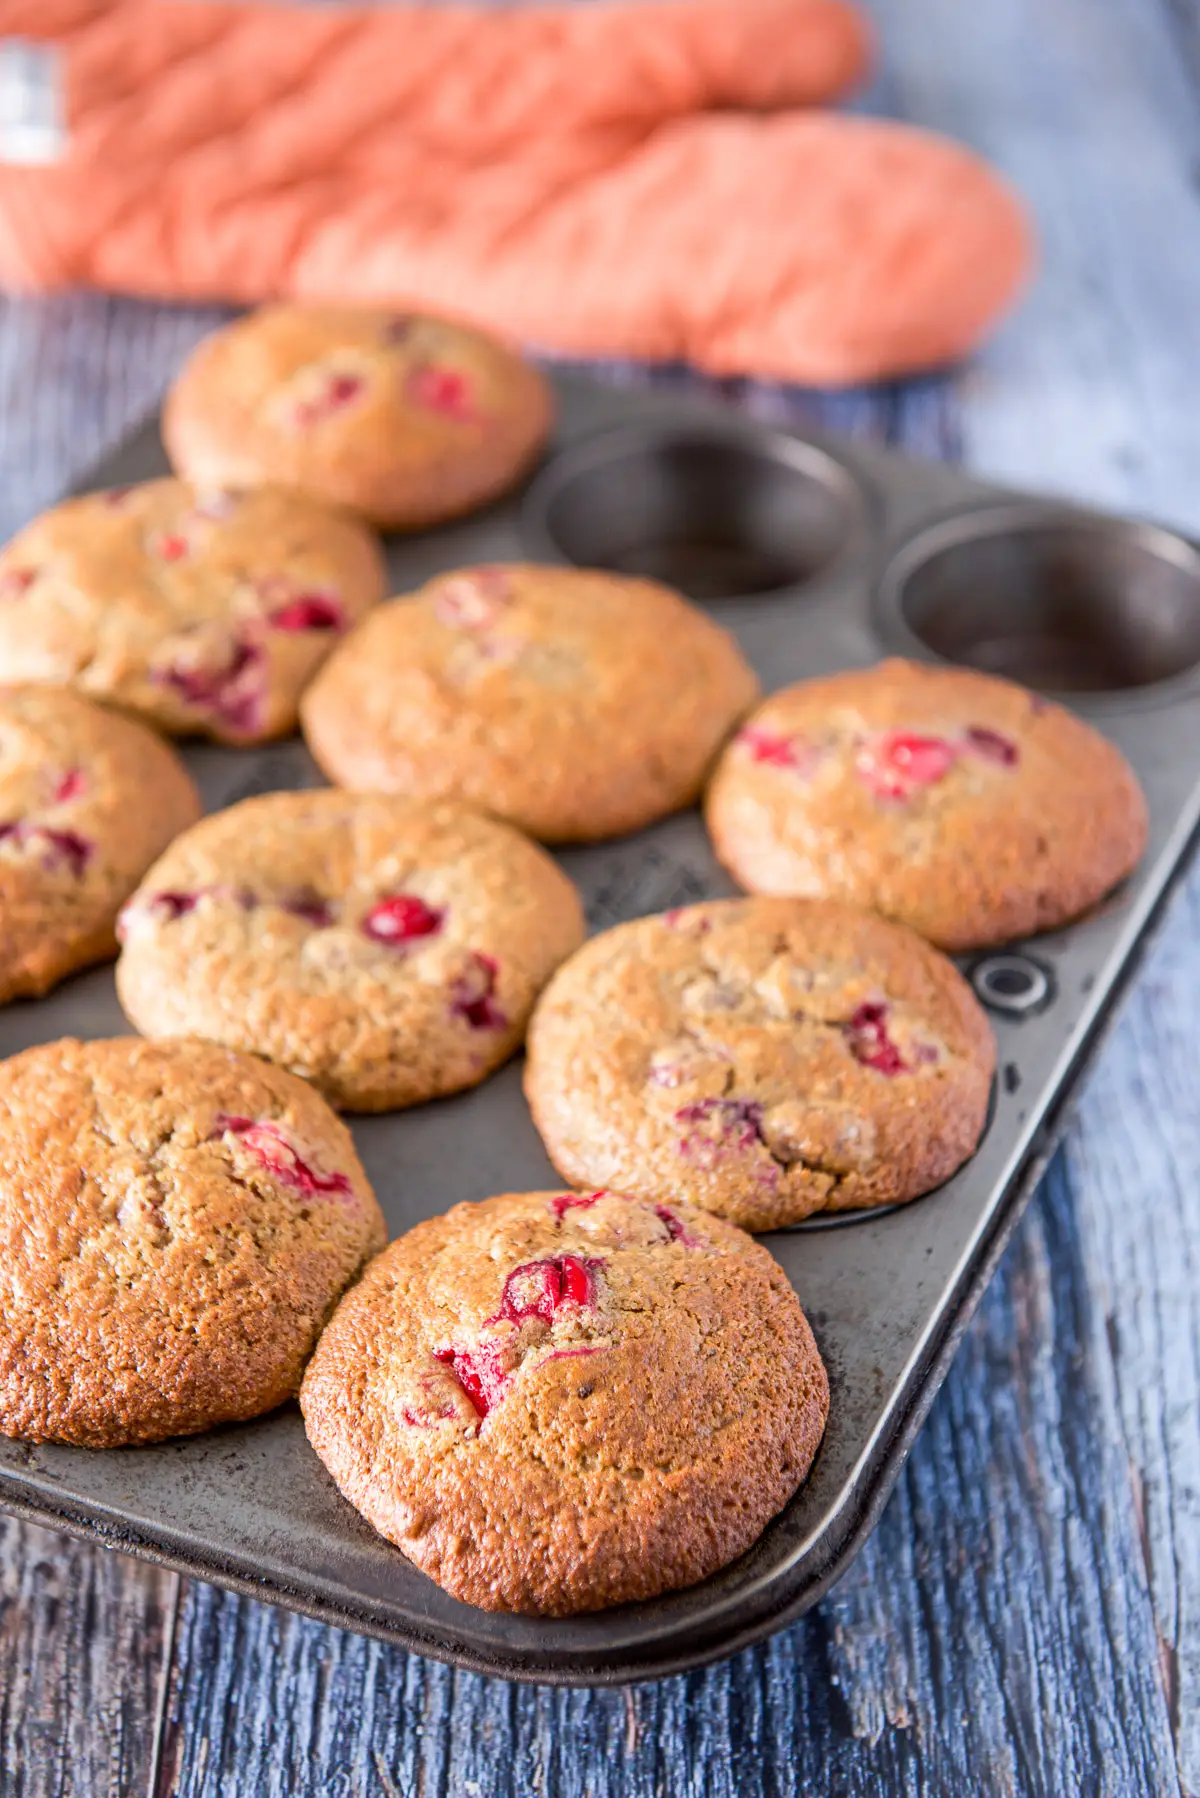 Cranberry muffins straight out of the oven still in the pan